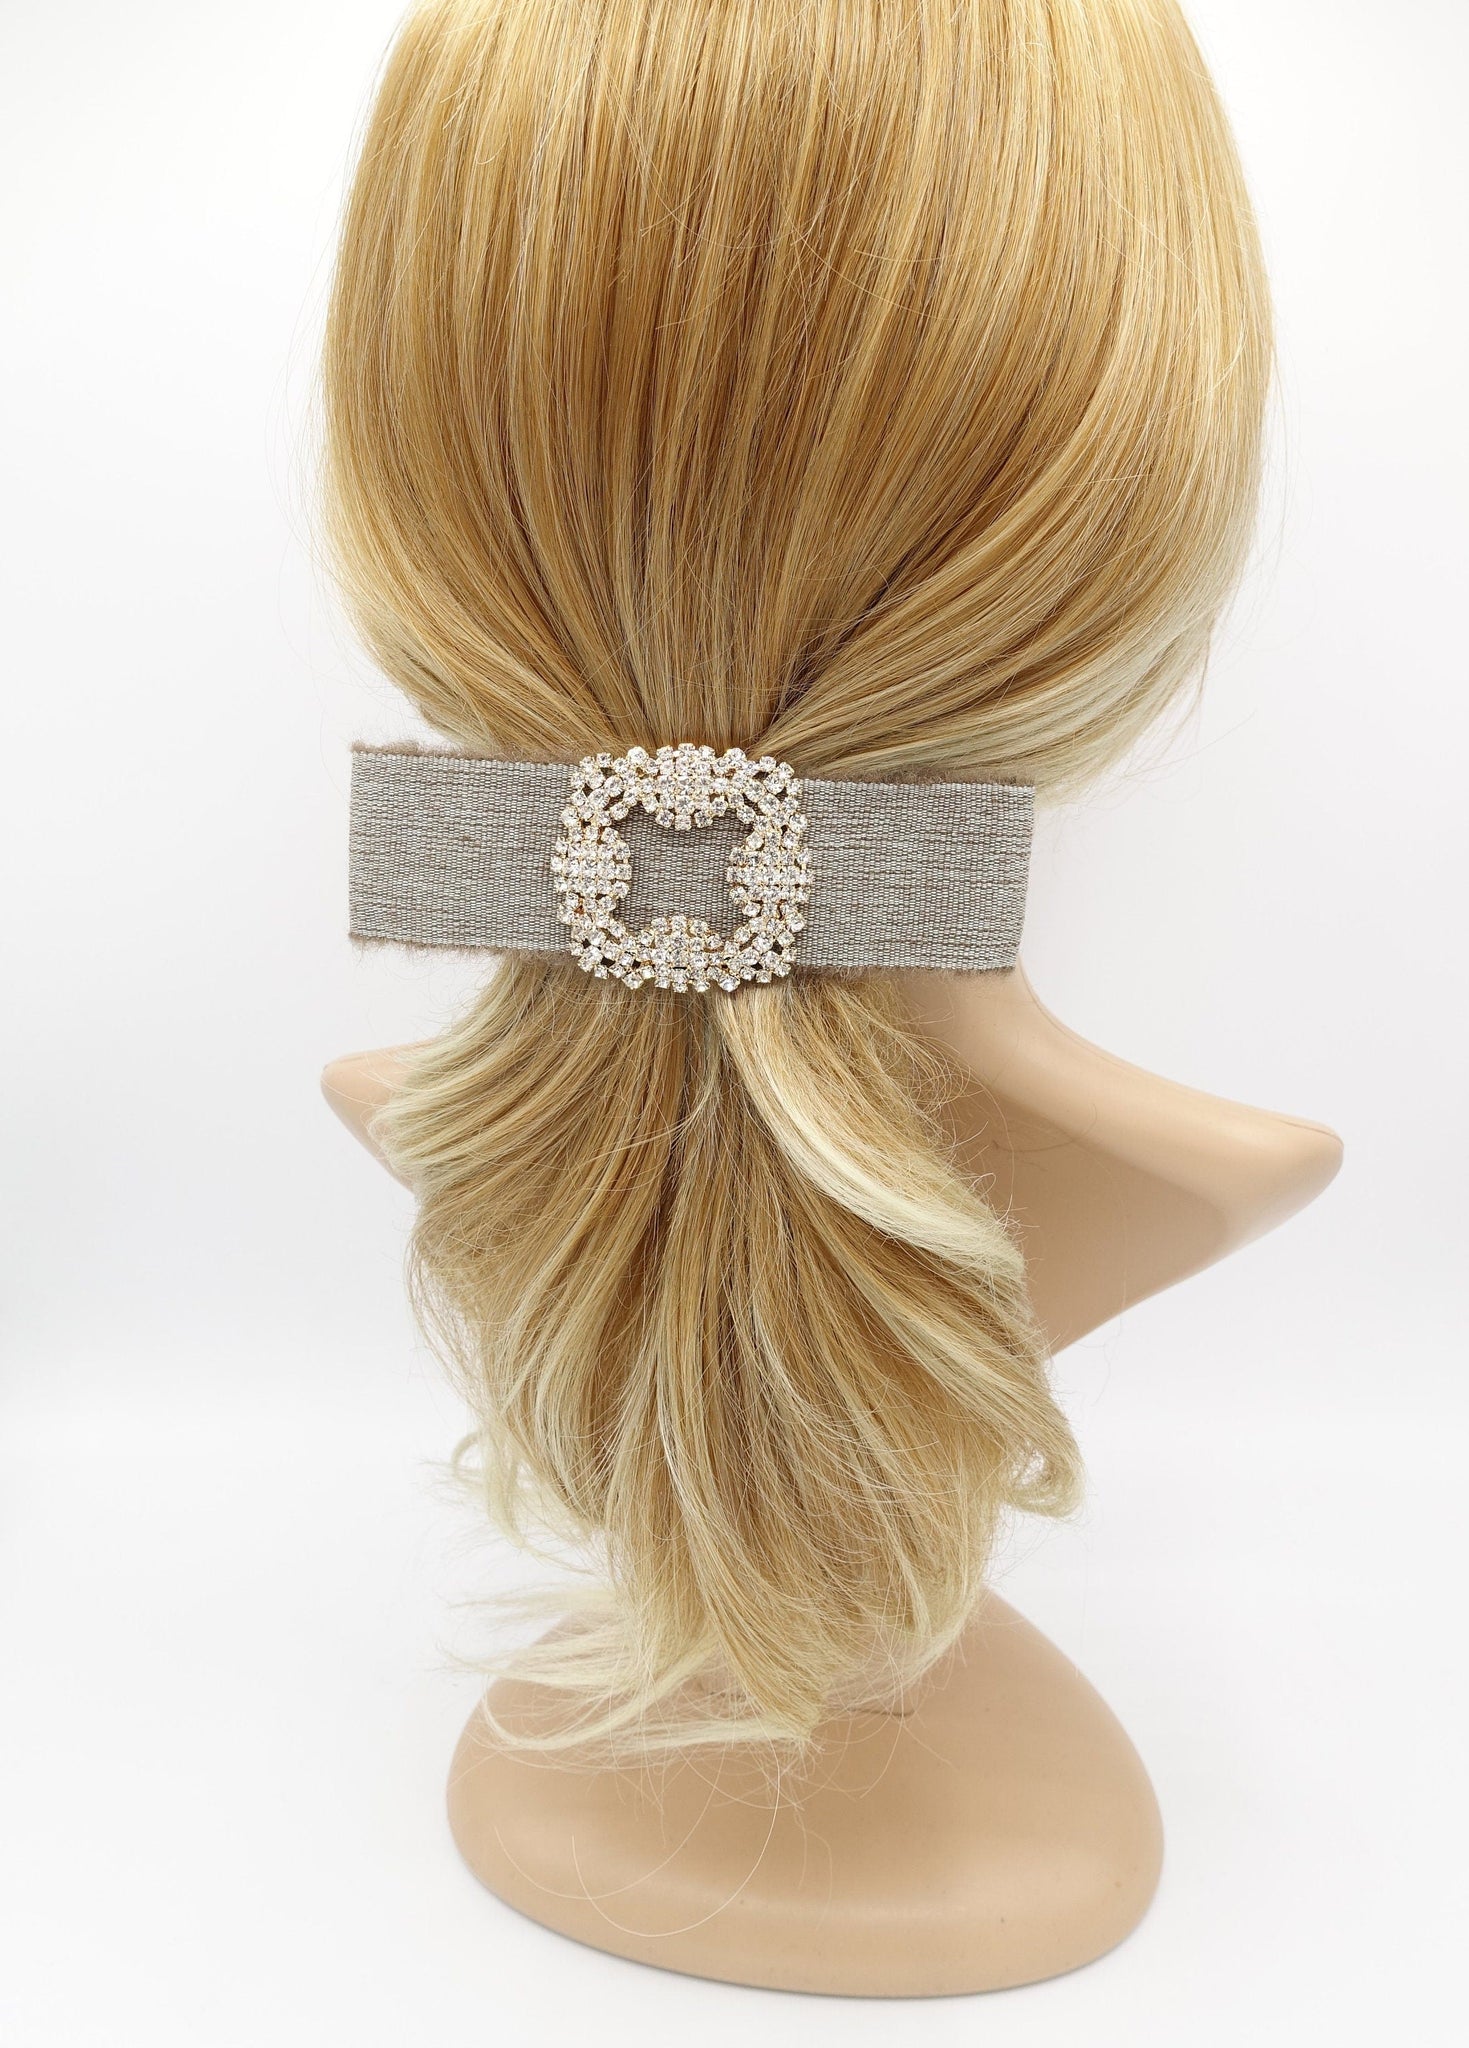 veryshine.com Barrette (Bow) classical fabric hair bow bling buckle frayed trim hair accessory for women